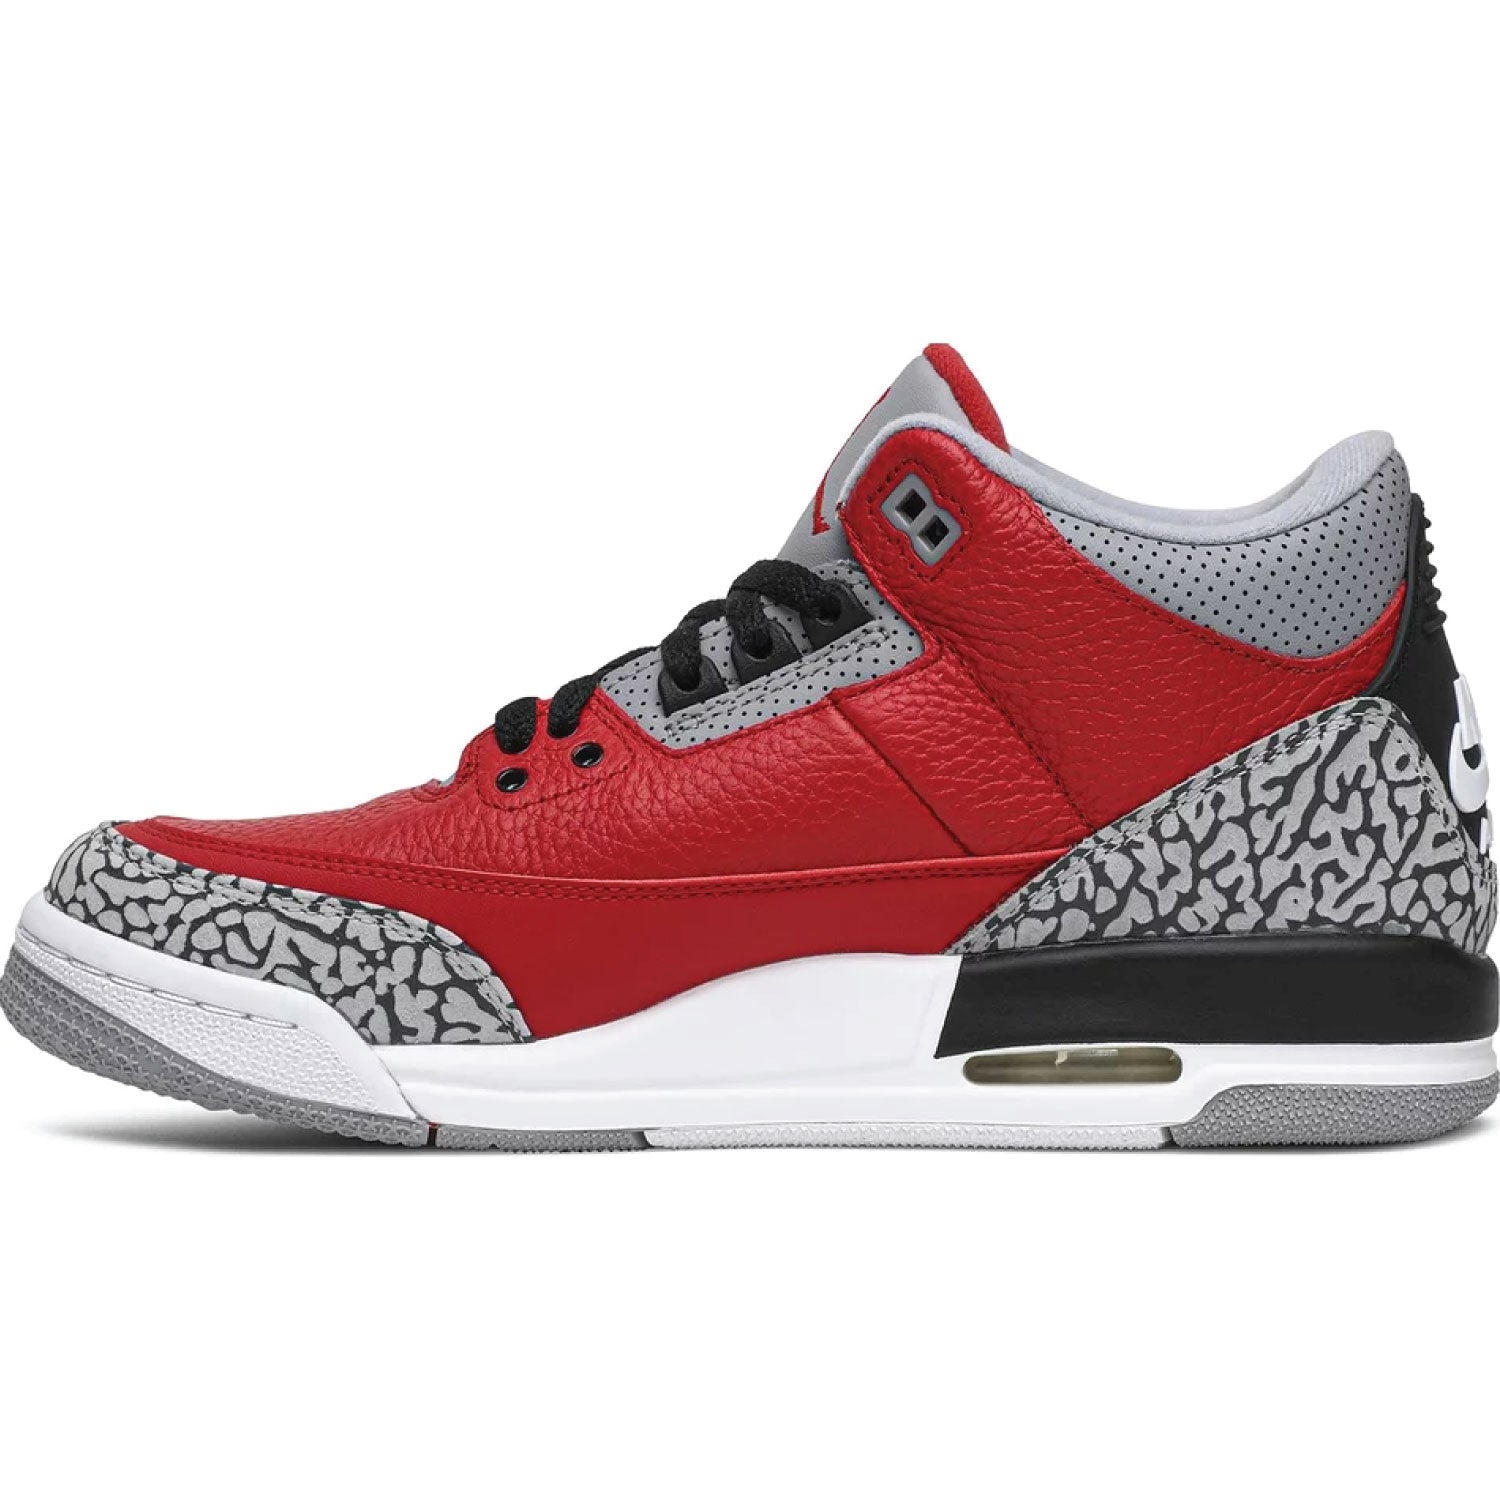 Air Jordan 3 Retro GS Fire Red Trainers Nike 5.5 UK Fire Red 